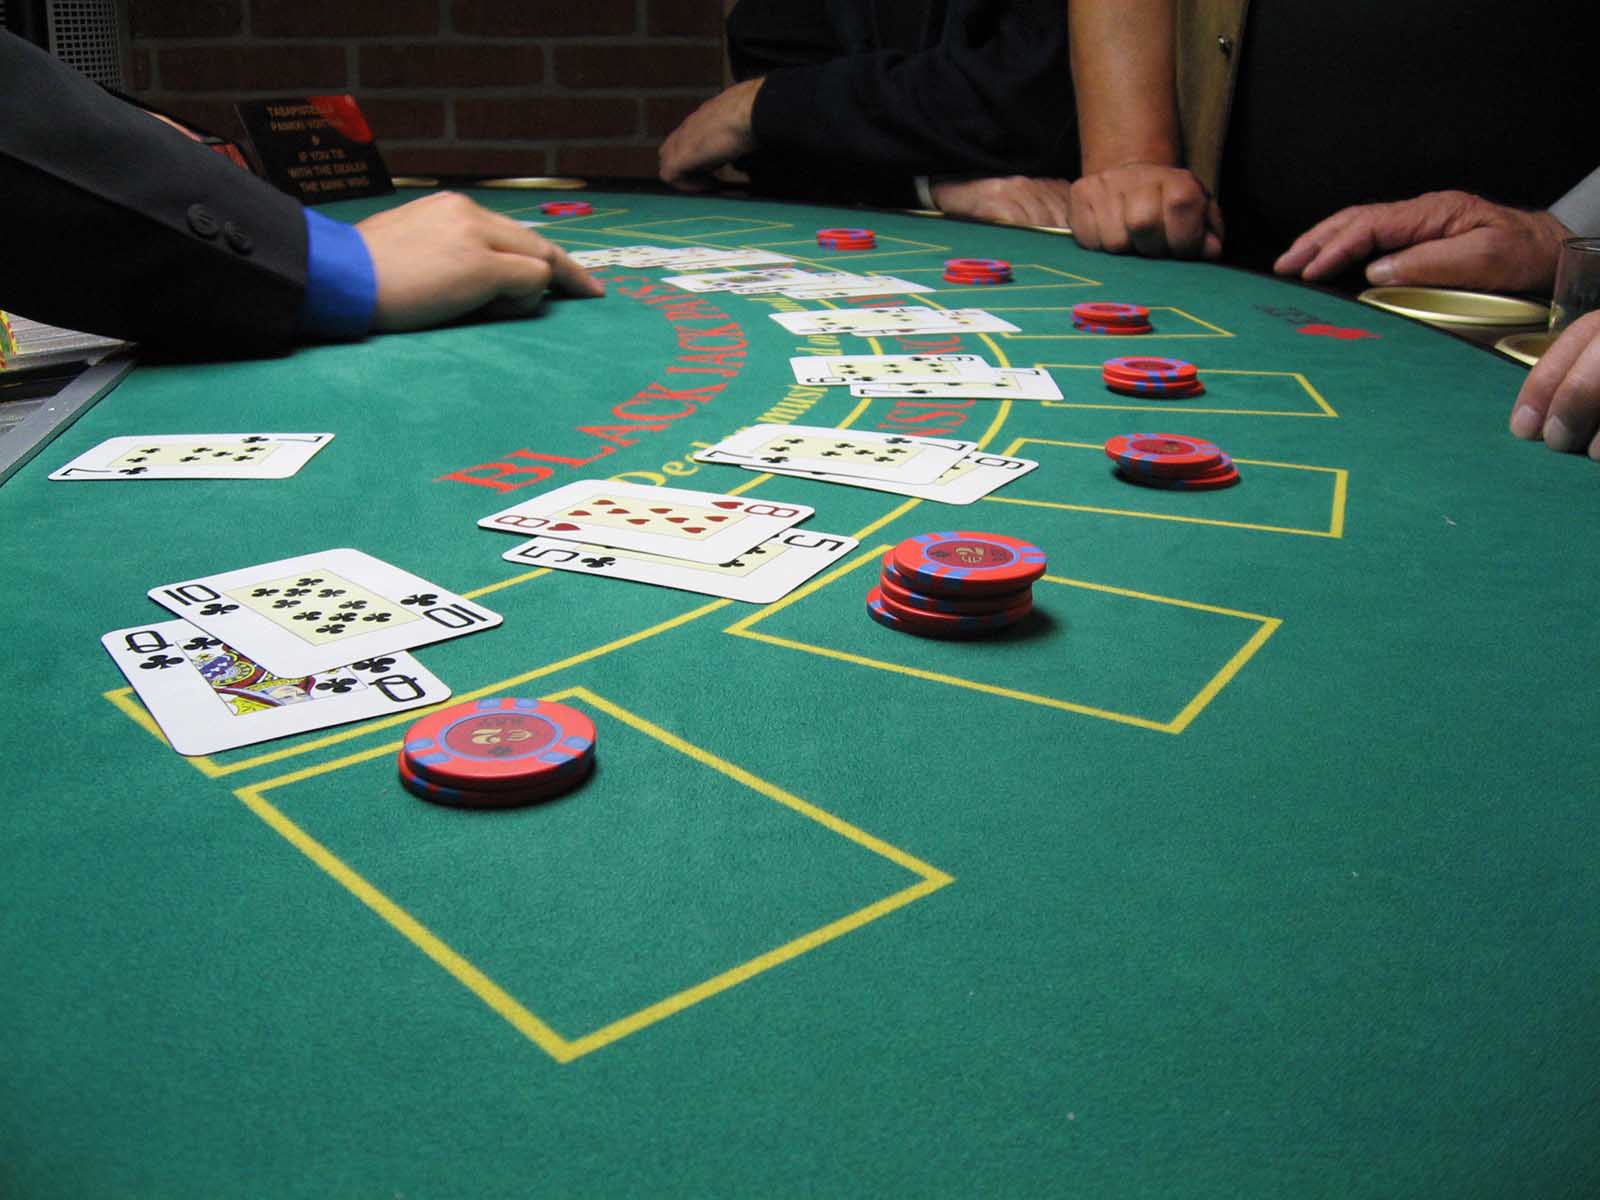 If you're a fan of online blackjack, and live in Canada, we have plenty of resources to help you find the best website to play on.